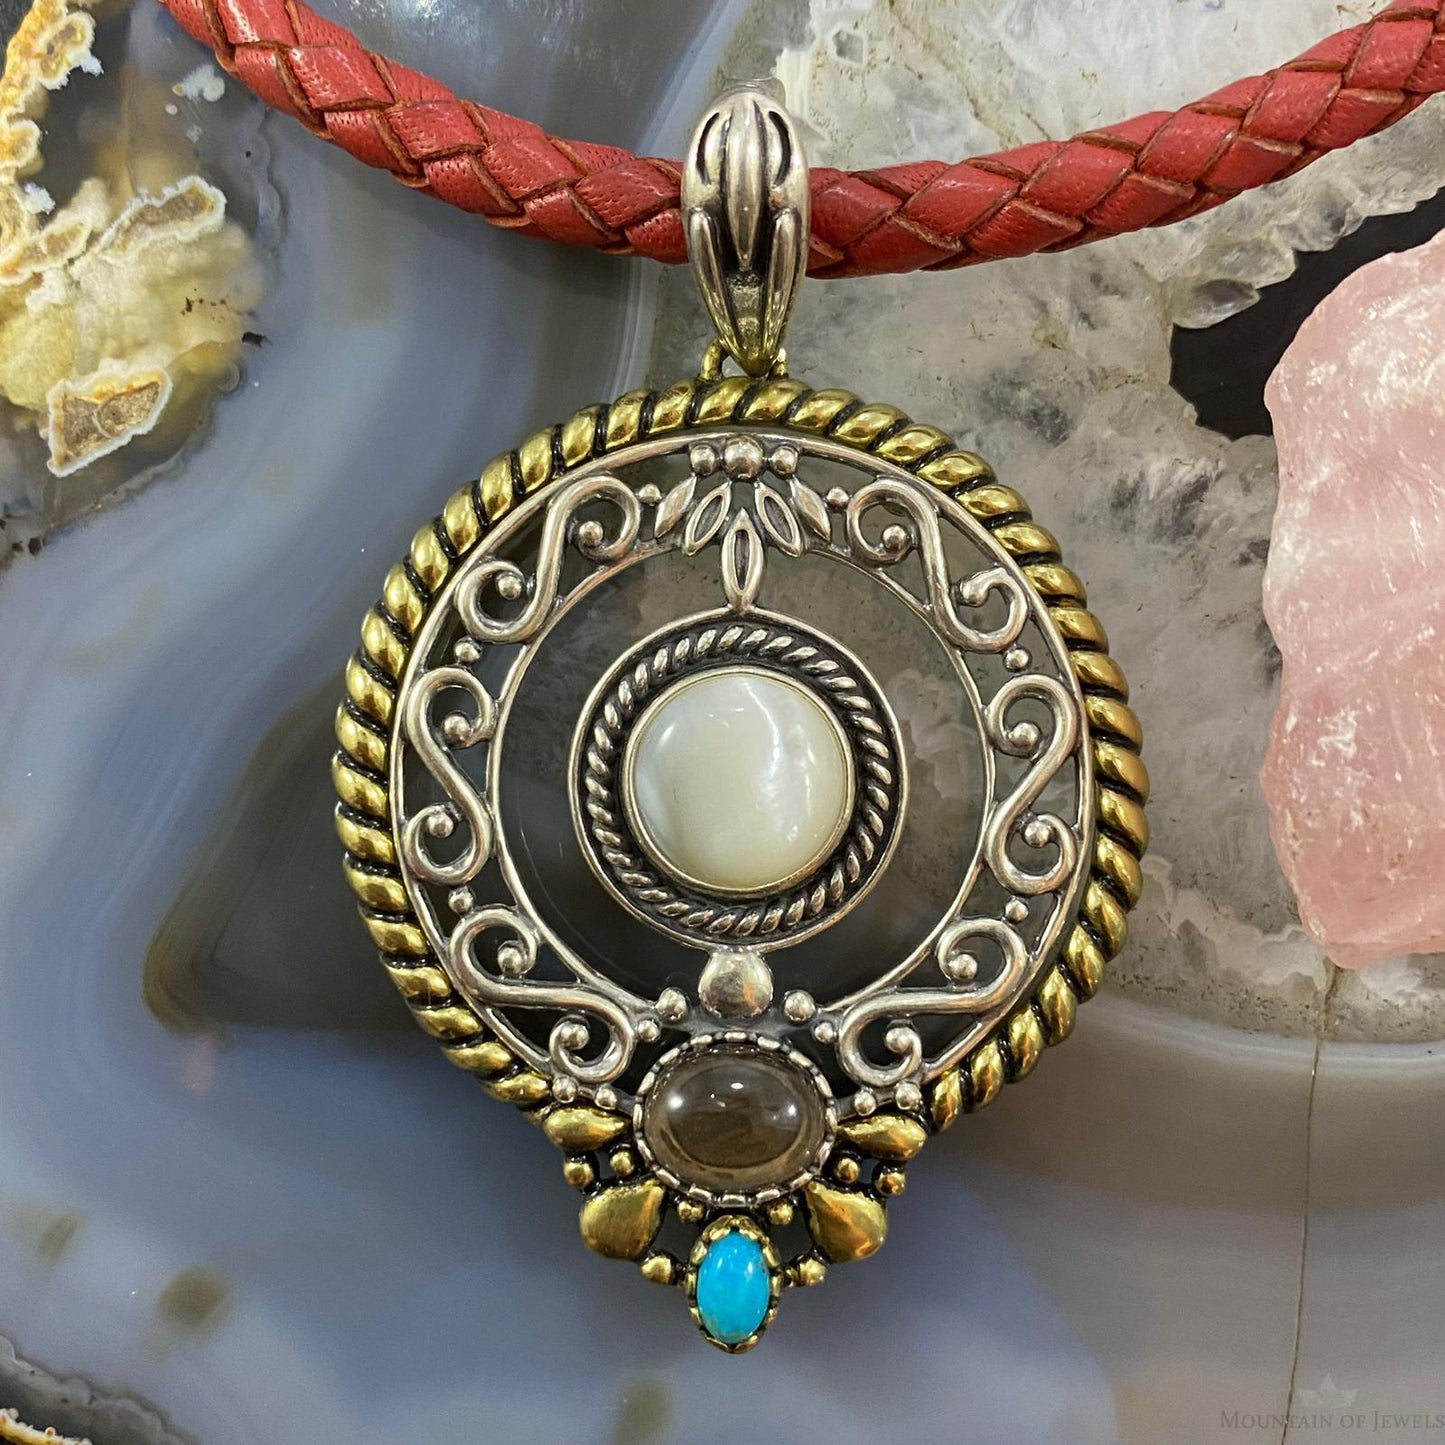 Carolyn Pollack Southwestern Style Sterling Silver & Brass Multistone Decorated Pendant For Women